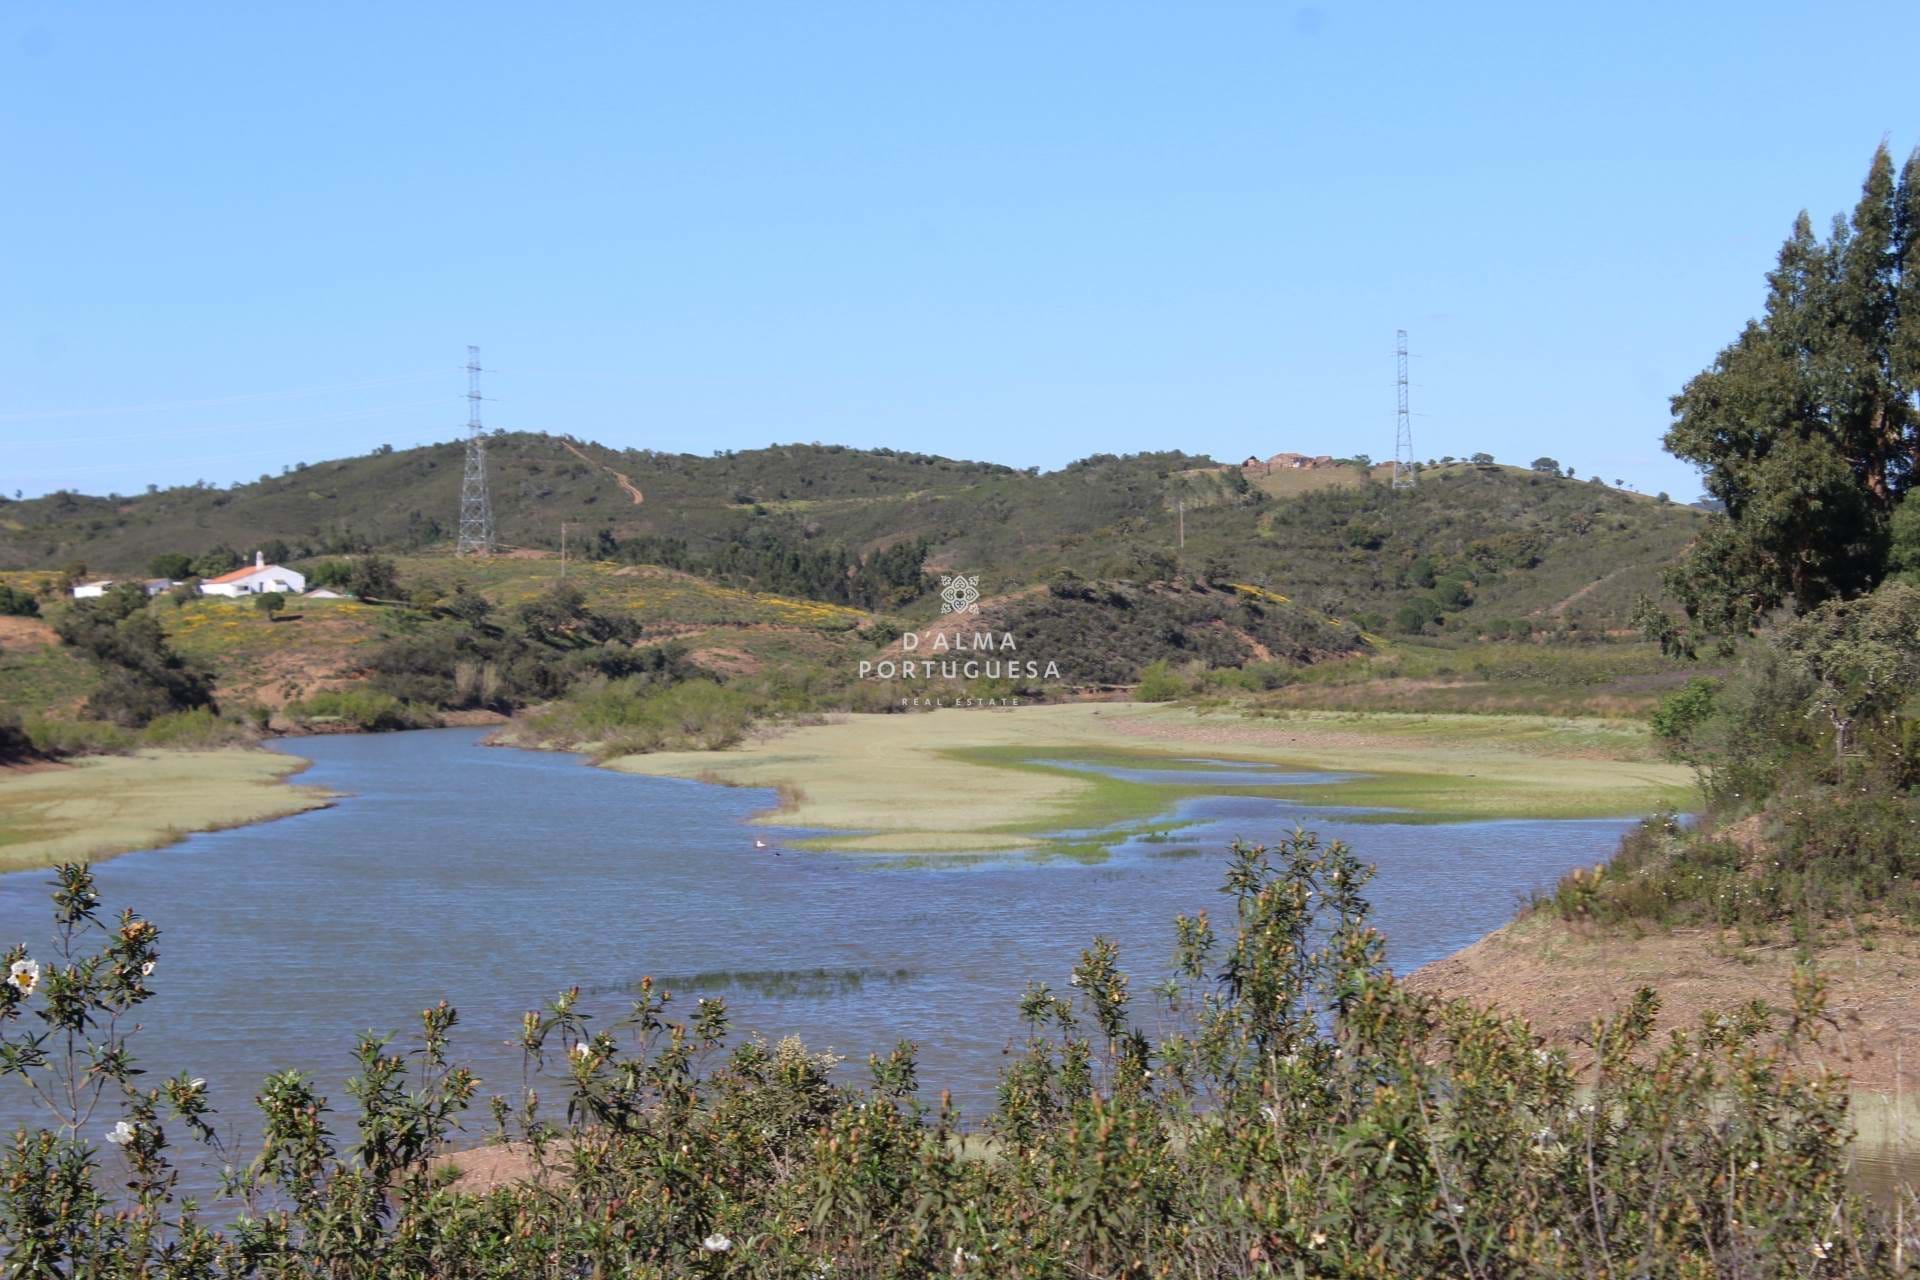 Algarb,nature,lake,country,investment